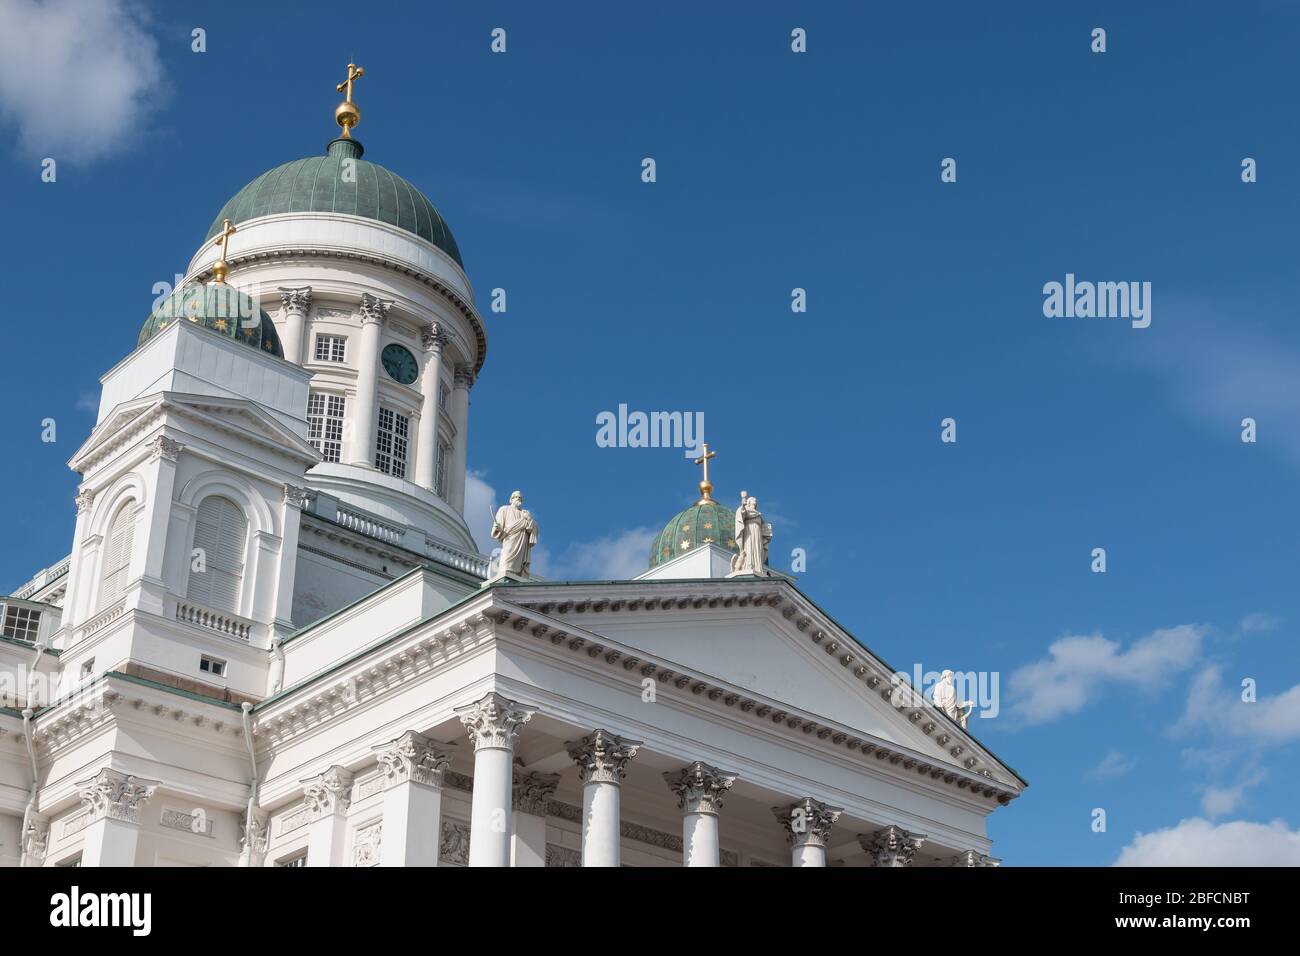 Helsinki Cathedral, a popular tourist attraction built in the neoclassical style in the centre of Helsinki, Finland Stock Photo